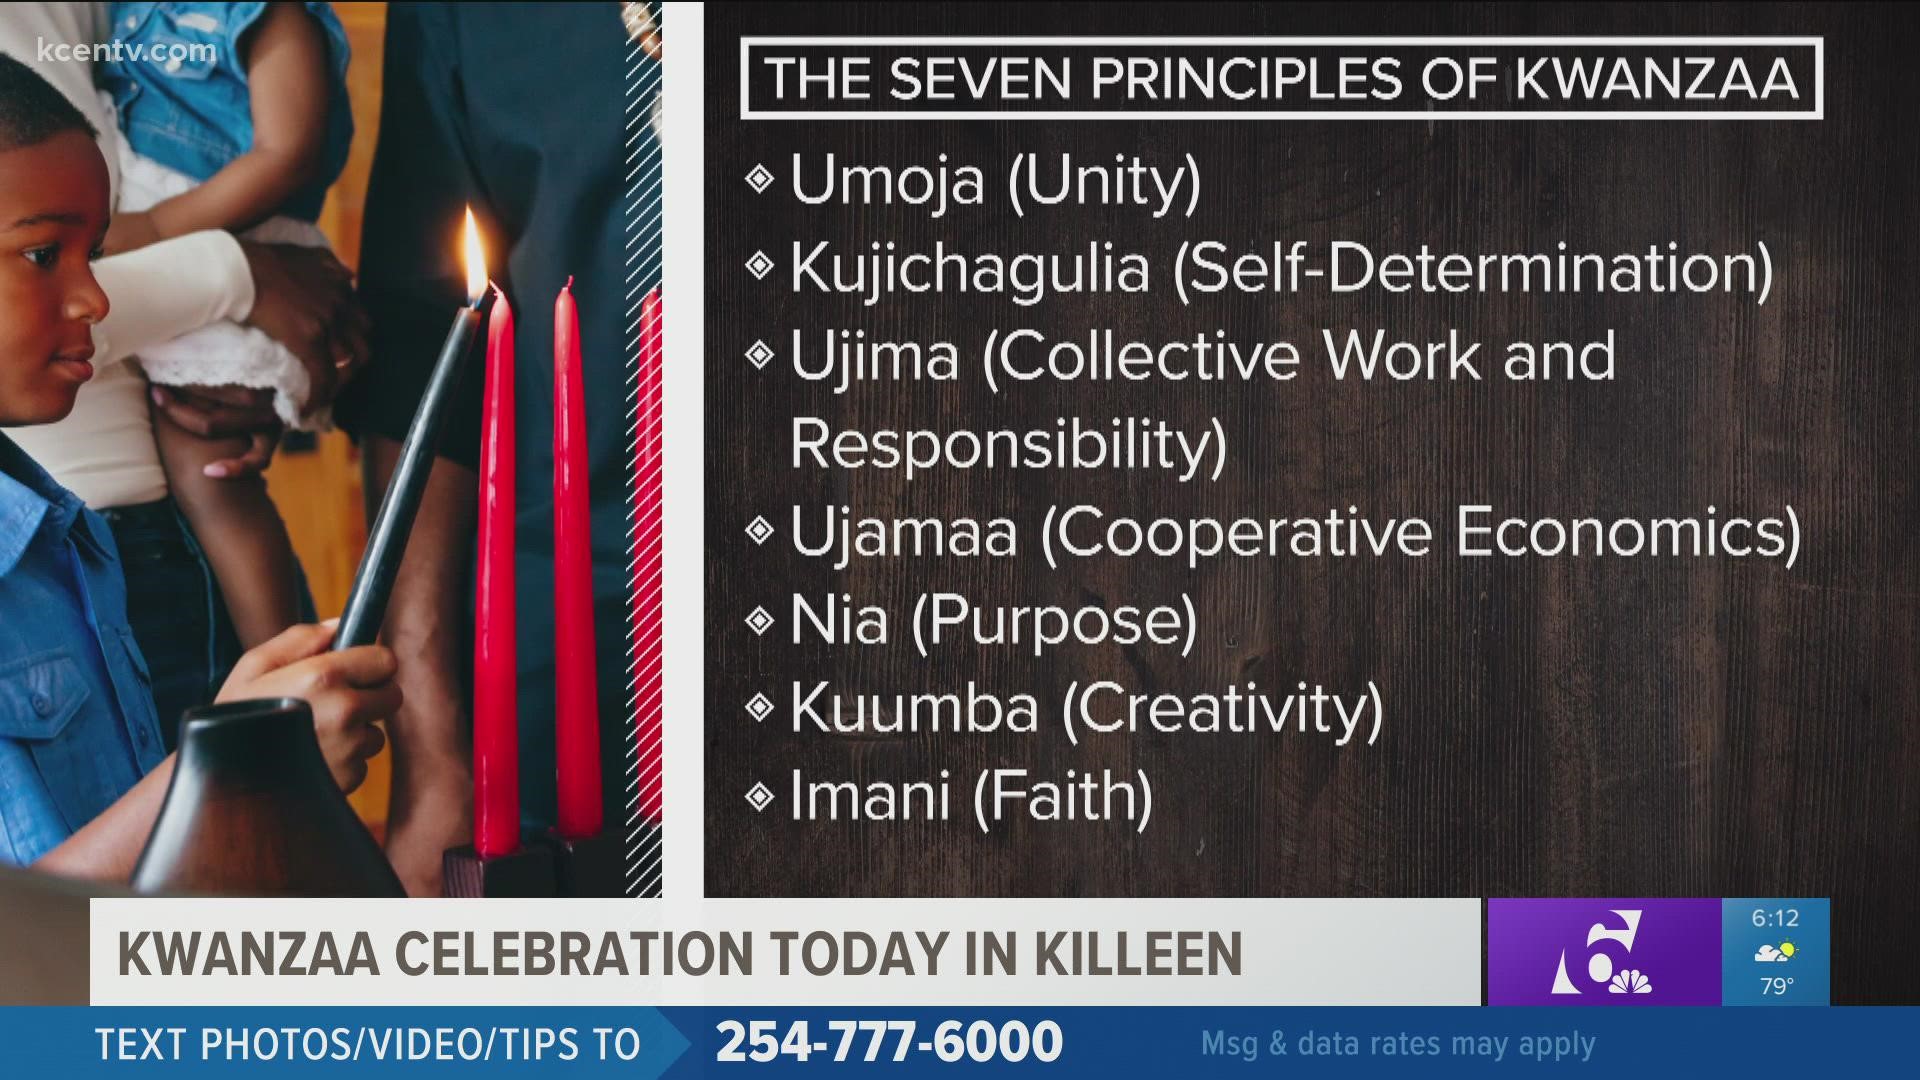 6 News Jasmin Caldwell takes us into the celebration of Kwanza as festivities take place in Killeen